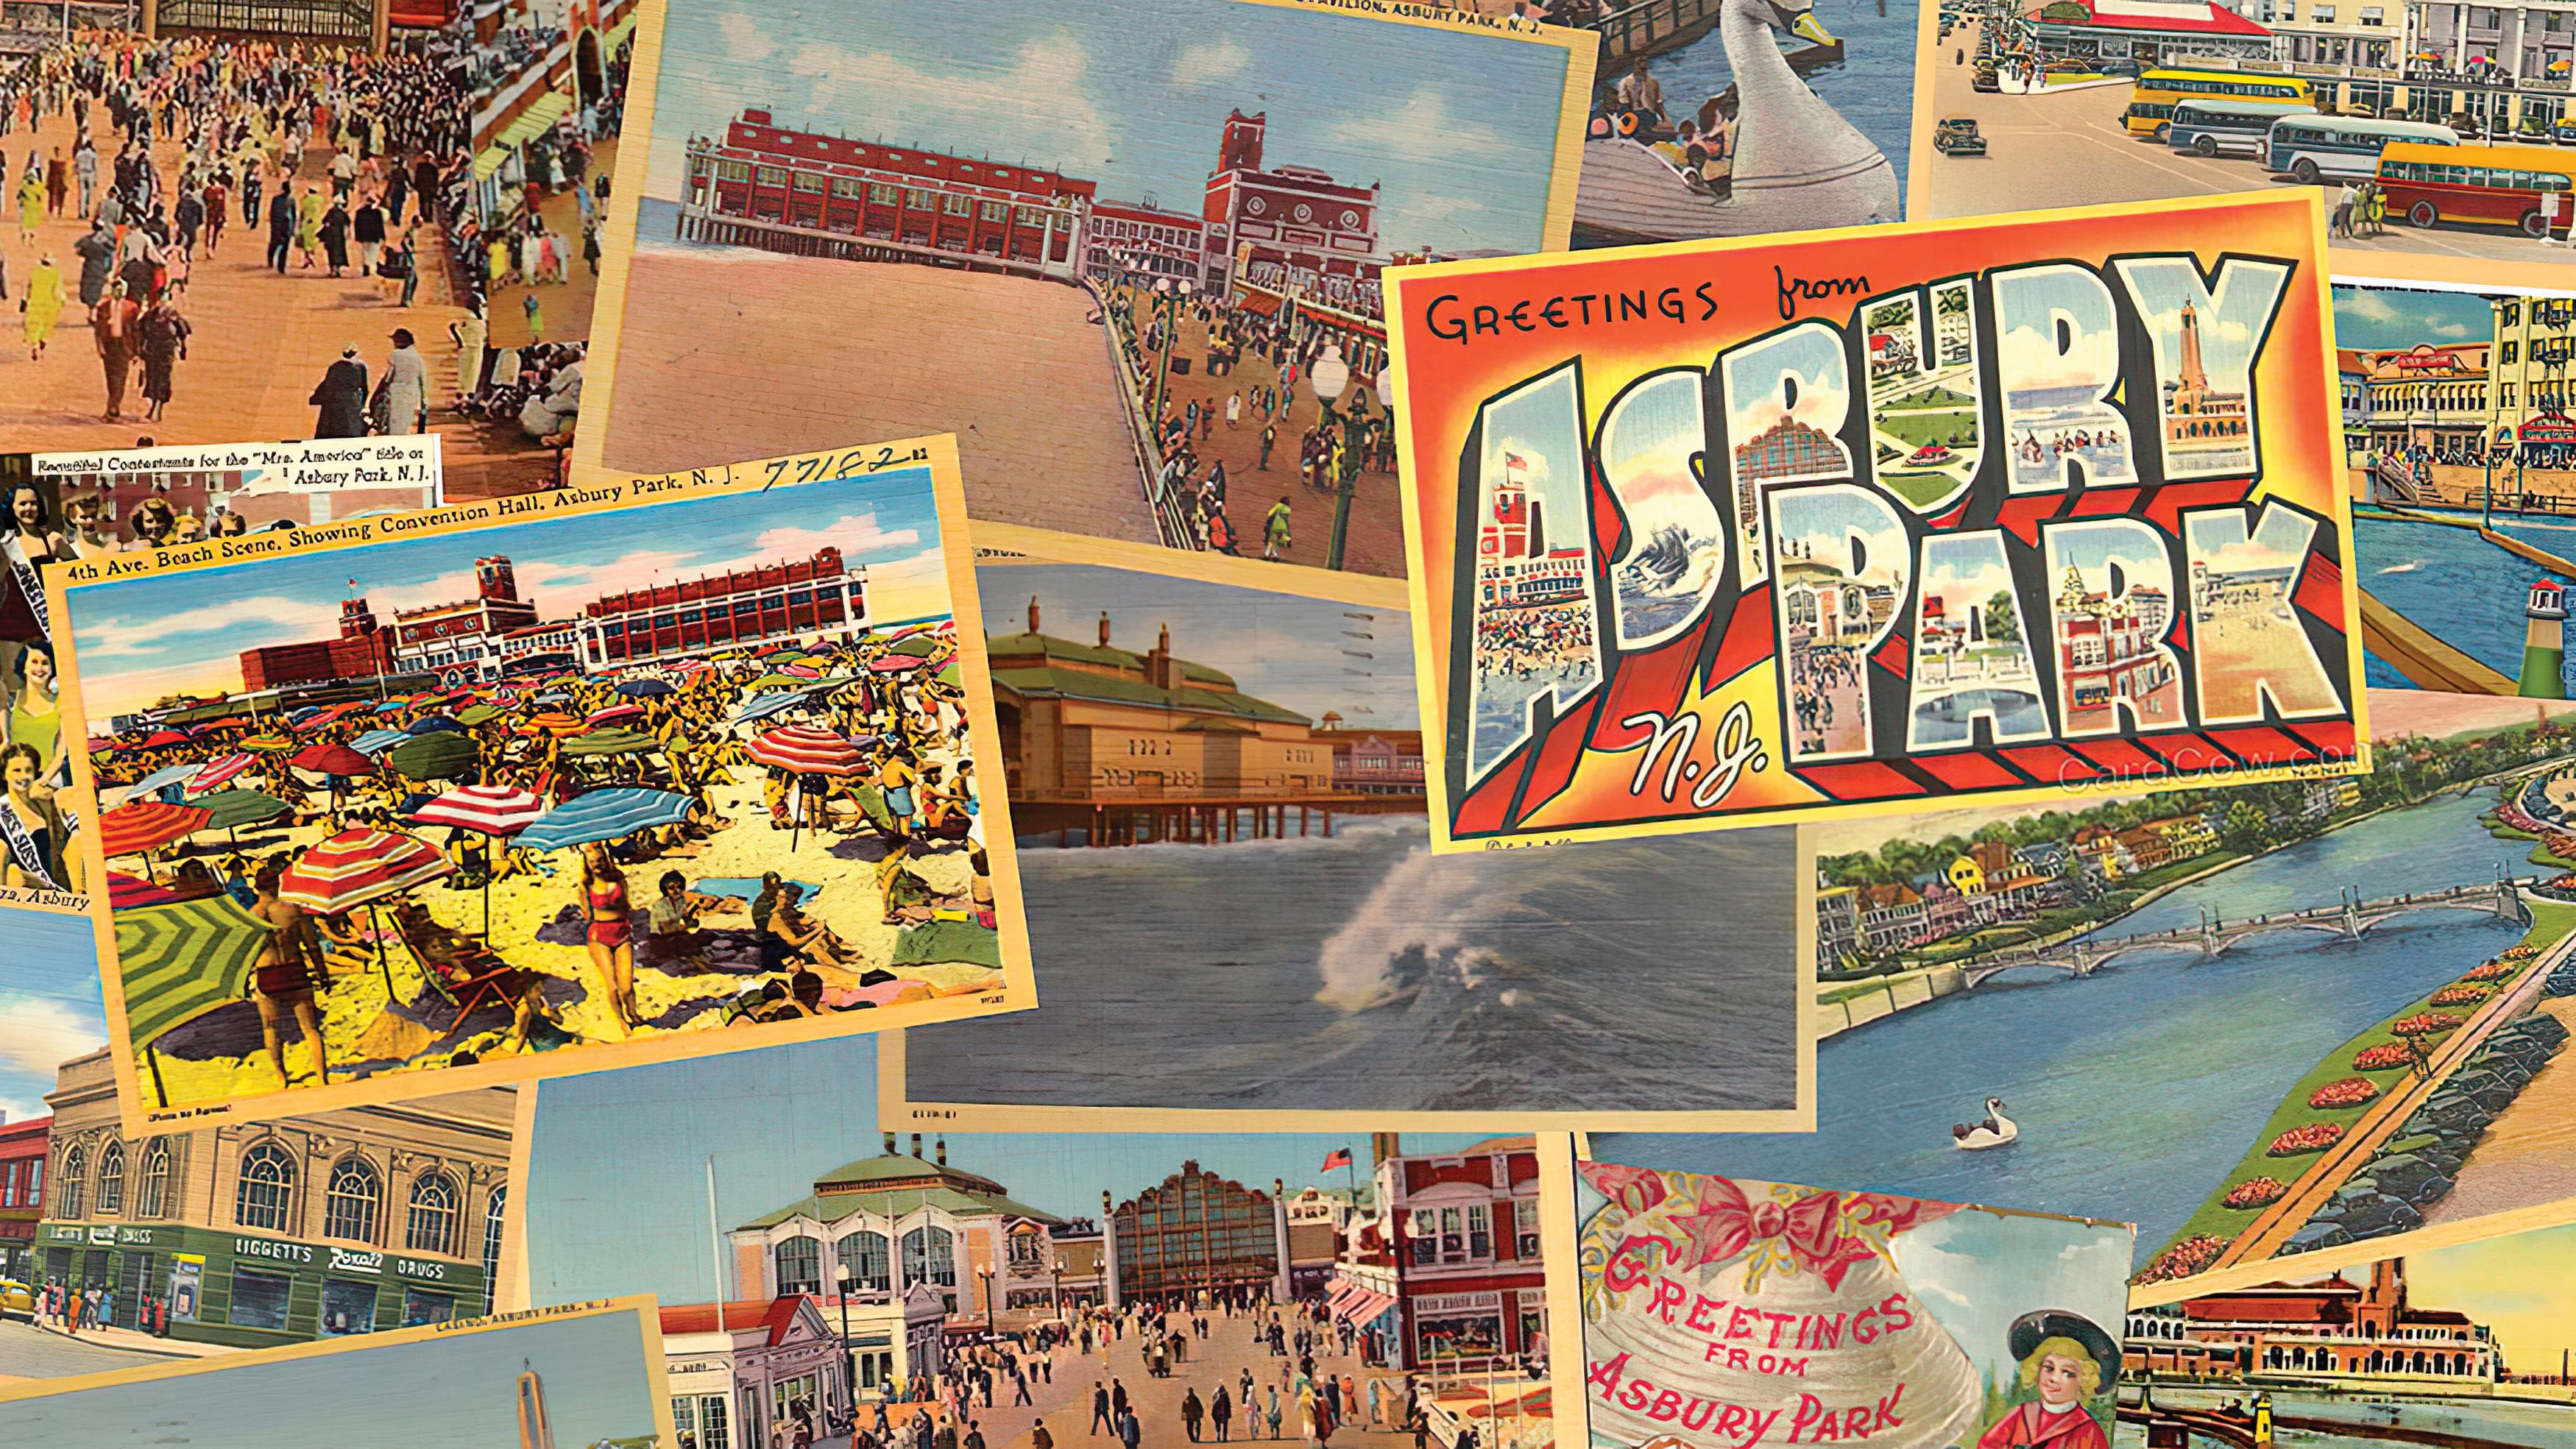 Asbury Park, New Jersey vintage-style postcard collection